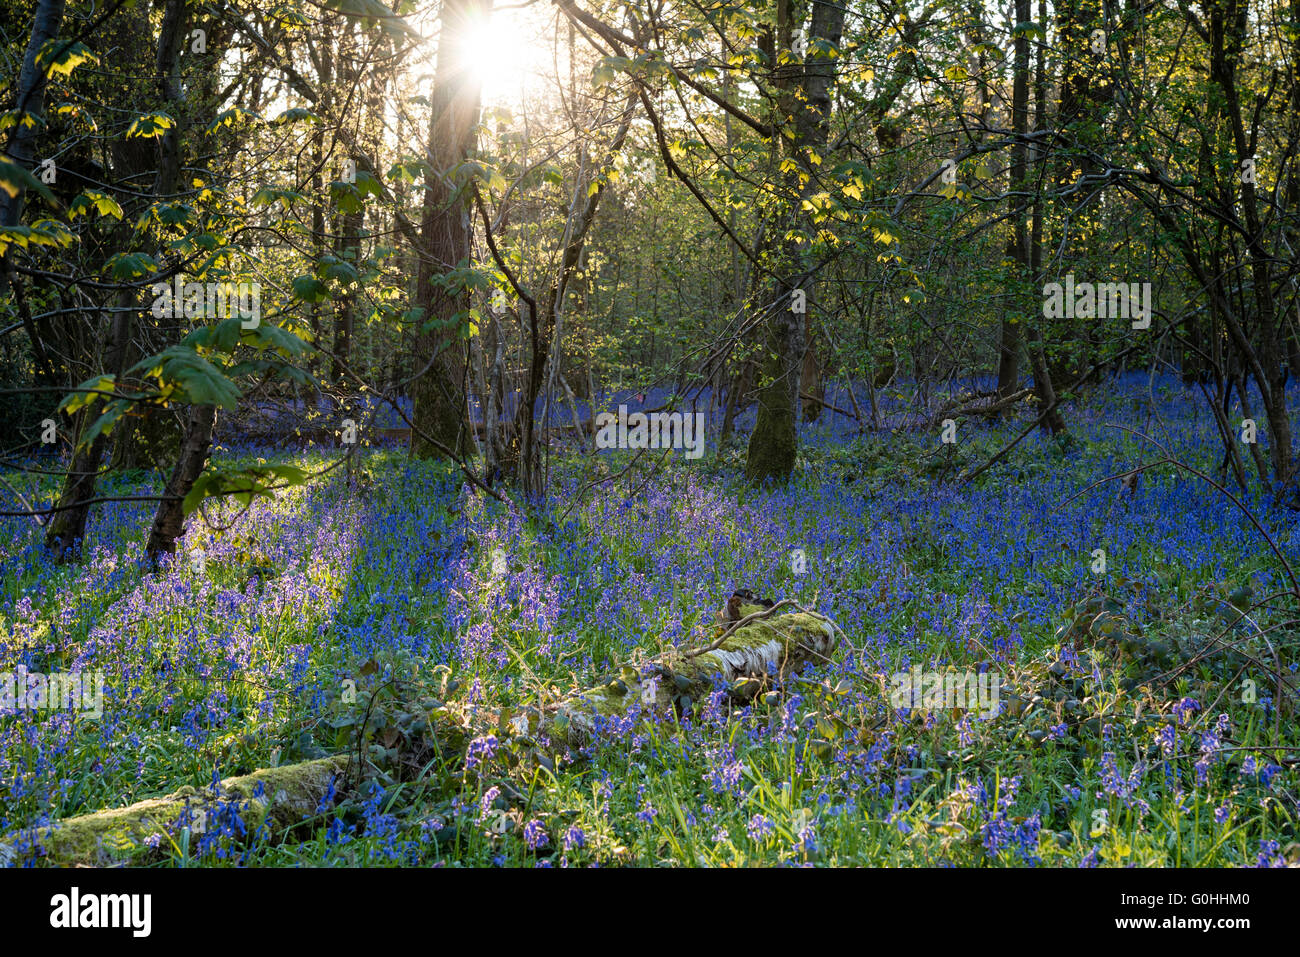 A bluebell wood in Wiltshire, UK. Stock Photo